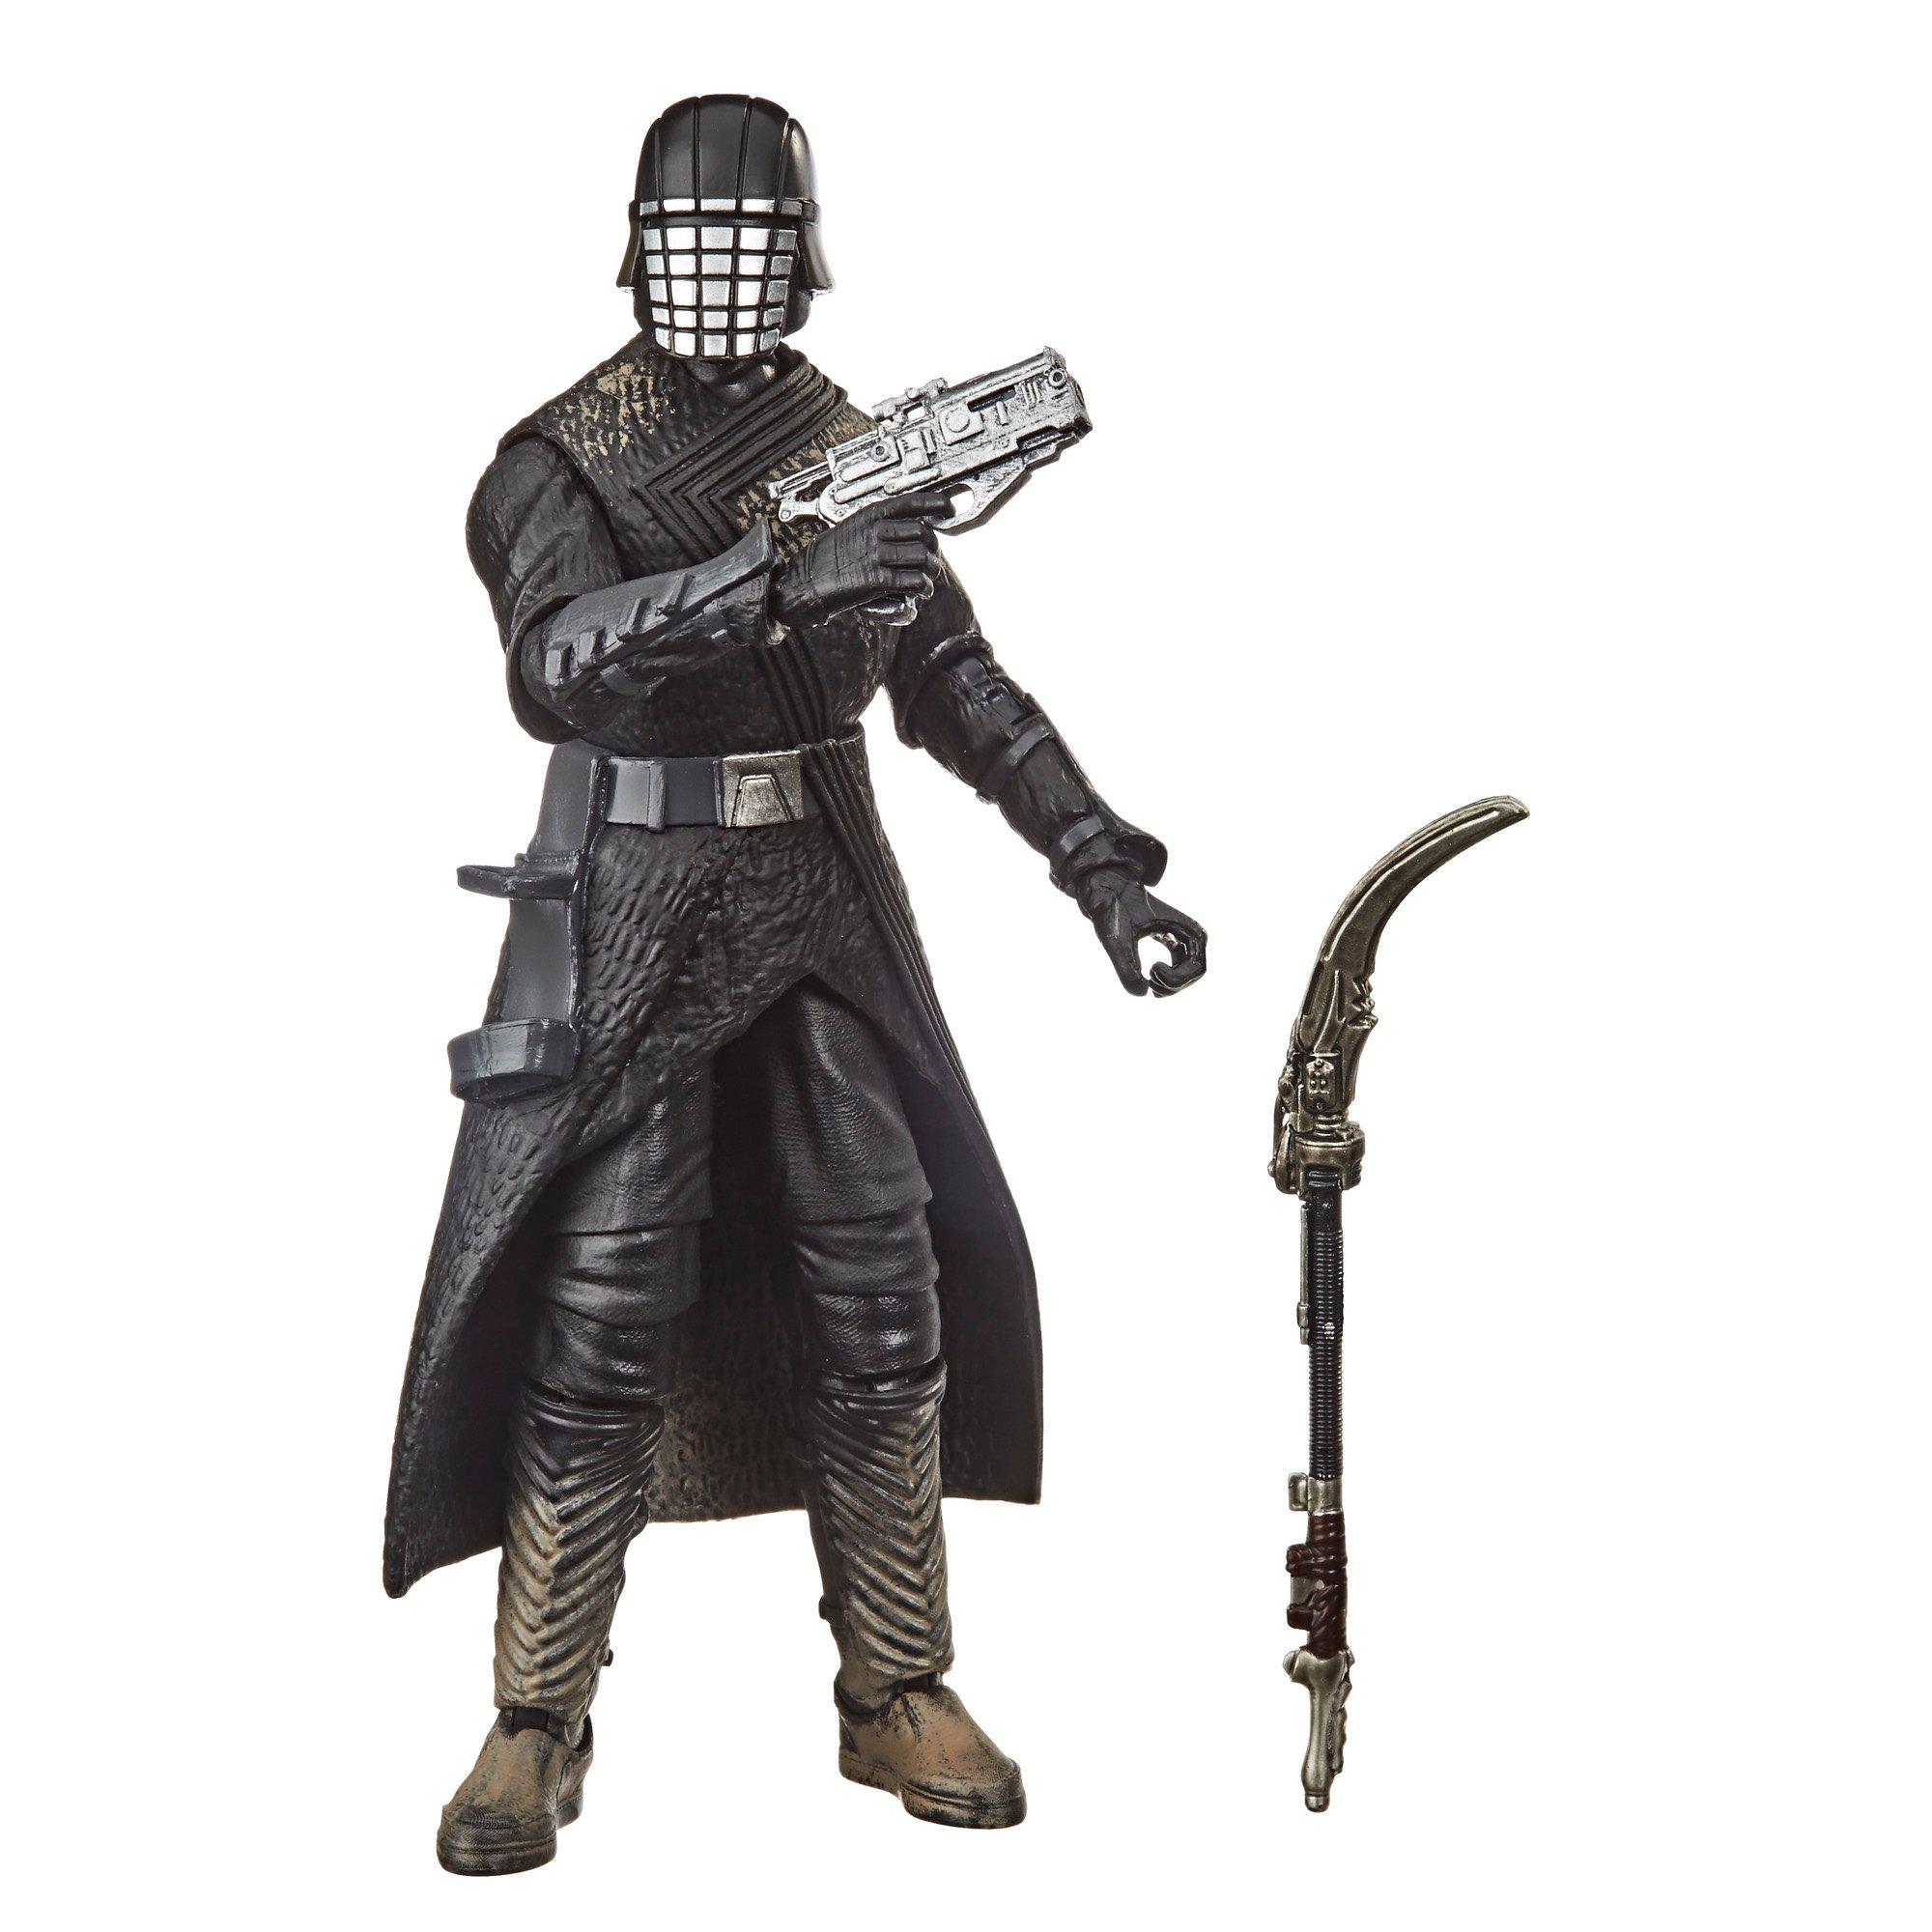 Star Wars Episode IX: The Rise of Skywalker Knight of Ren The Black Series Action Figure